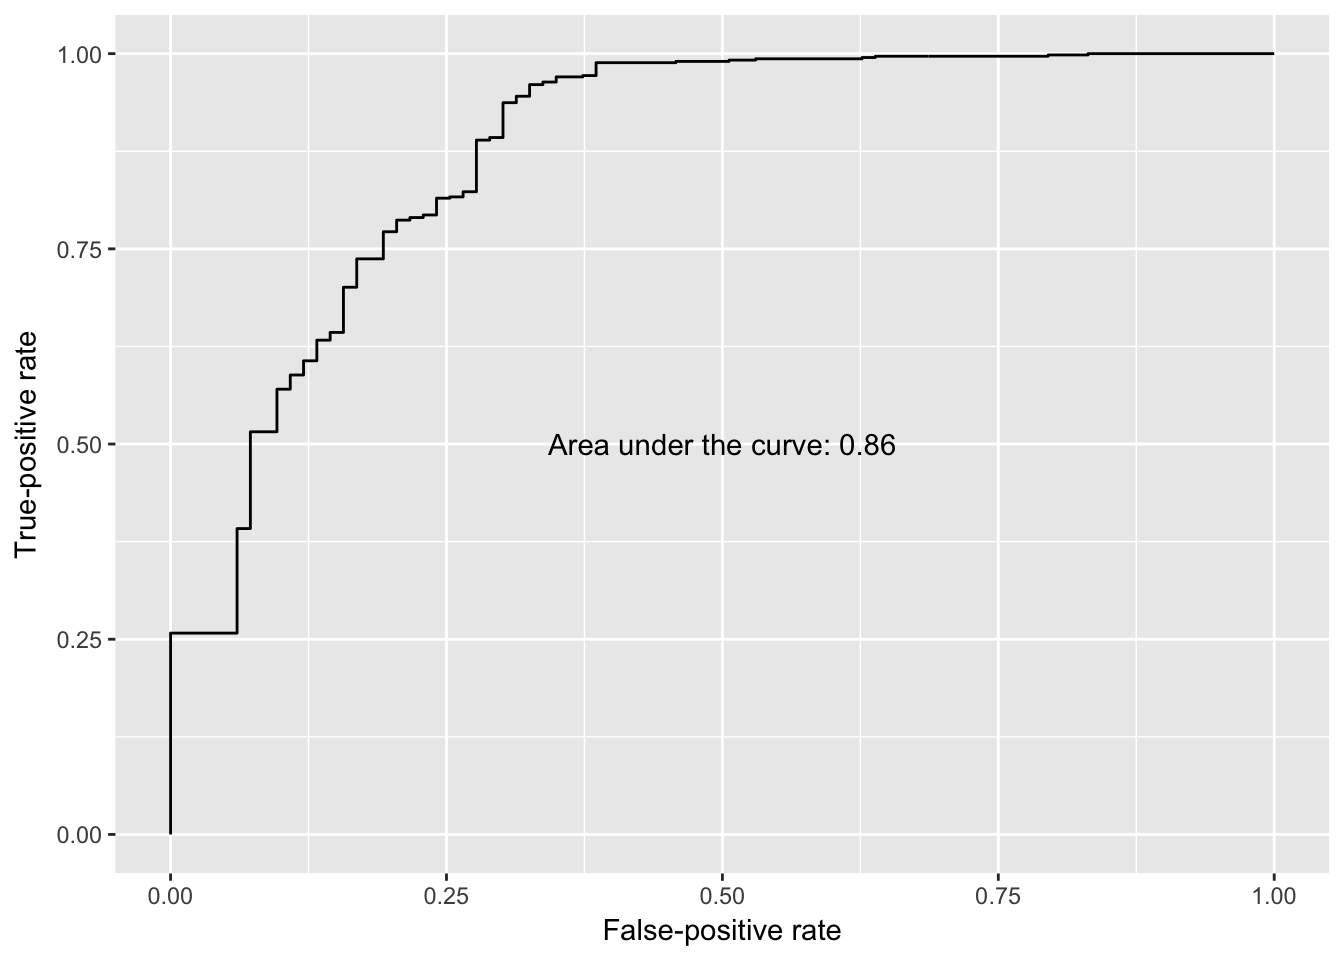 Cross-validated ROC curve and AUC metric